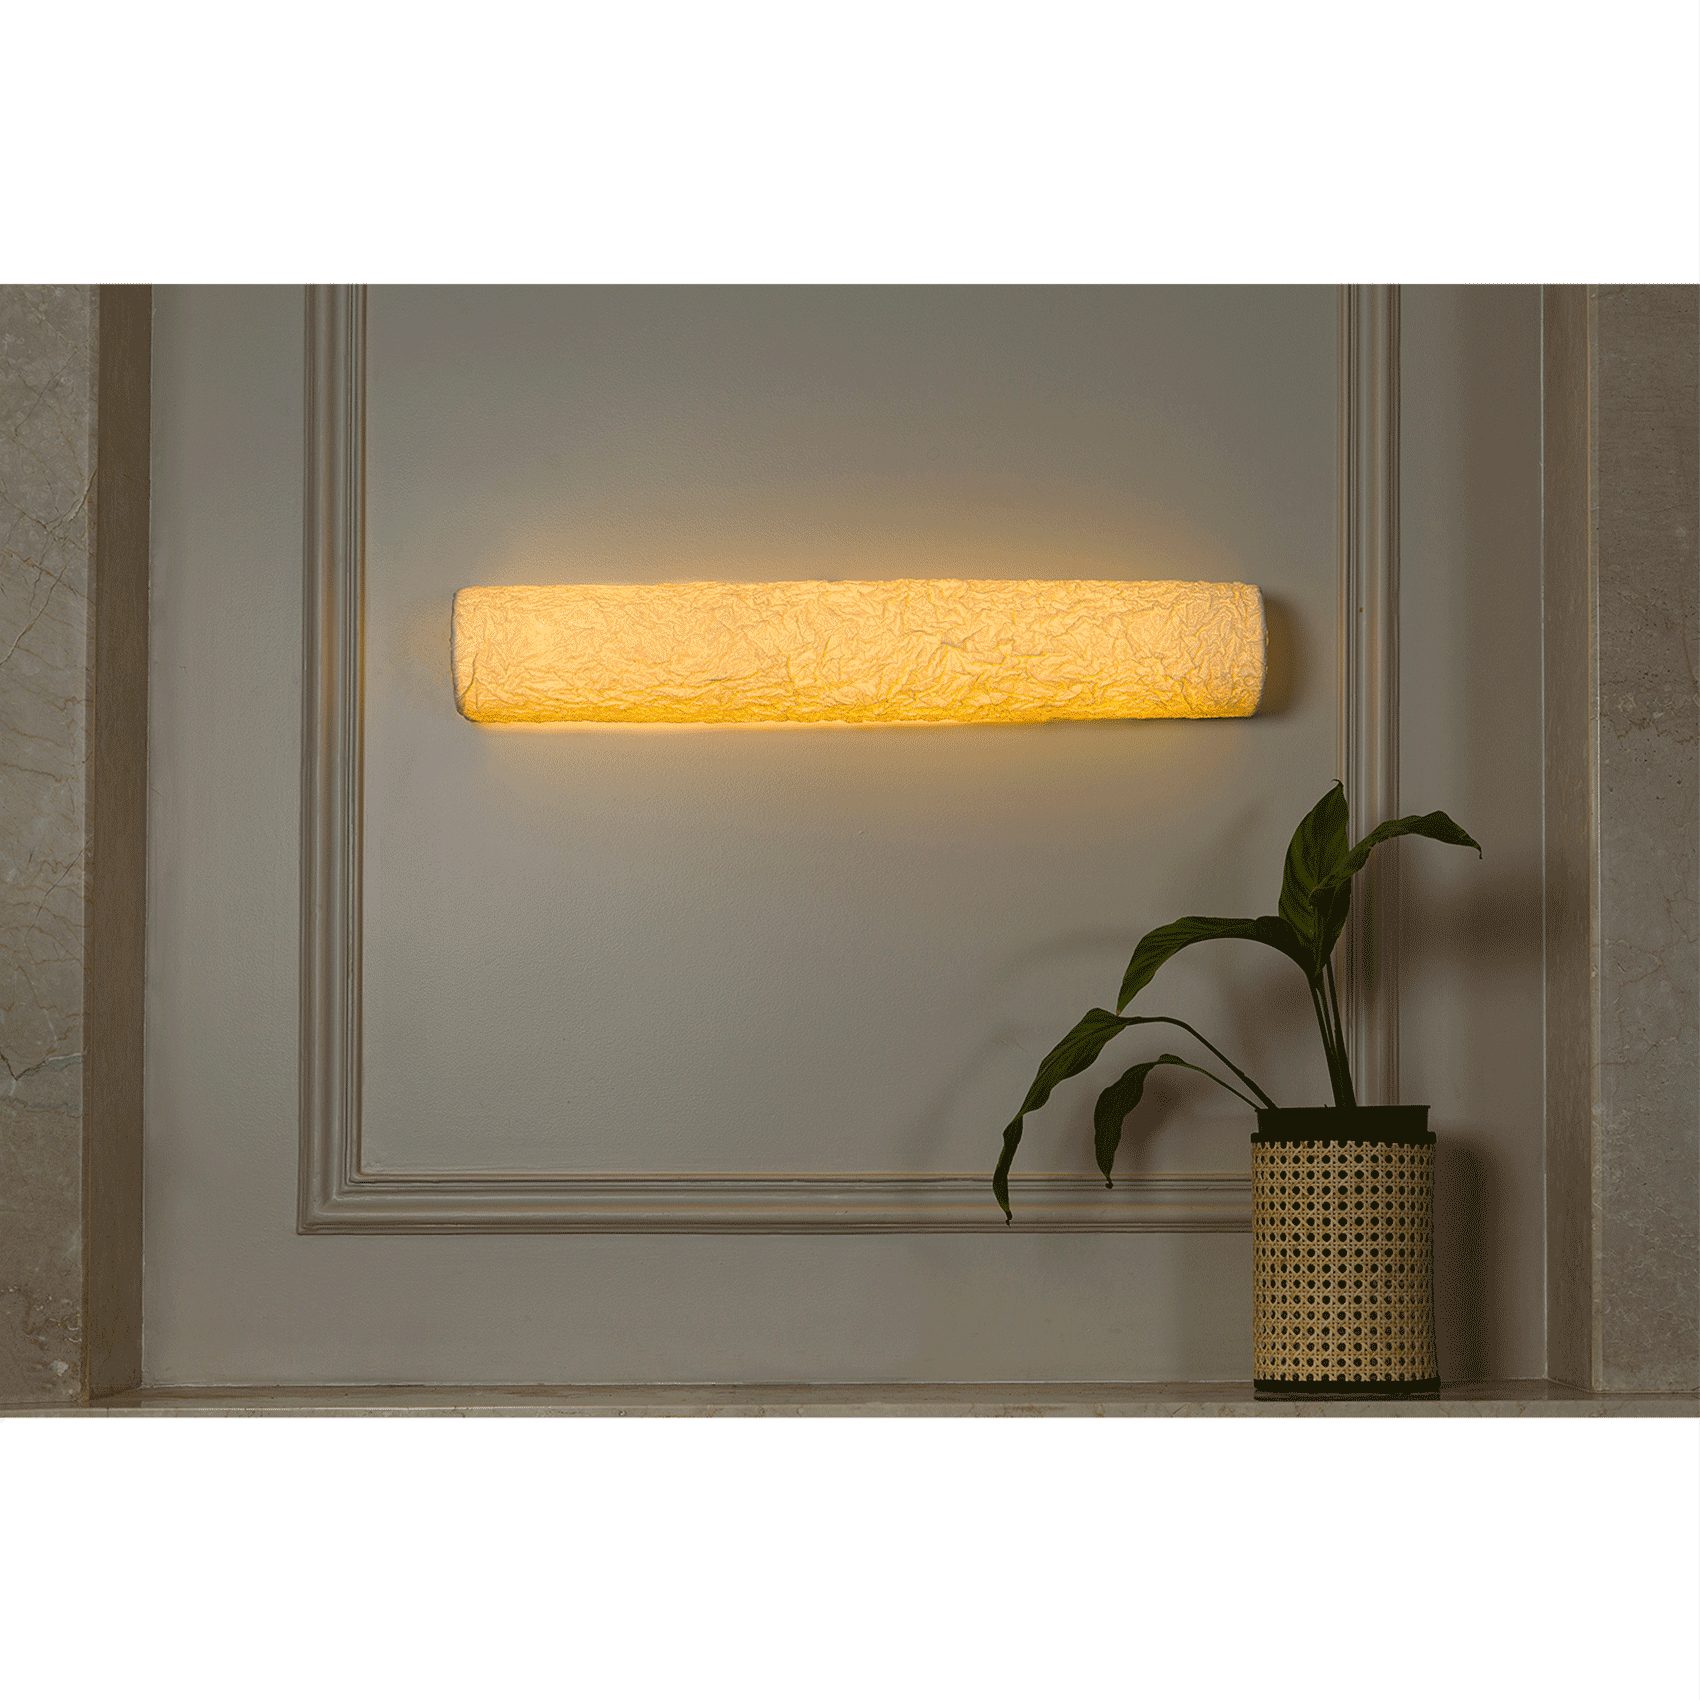 Handcrafted Banana Fiber Paper and Crushed Wall Mounted Lamps